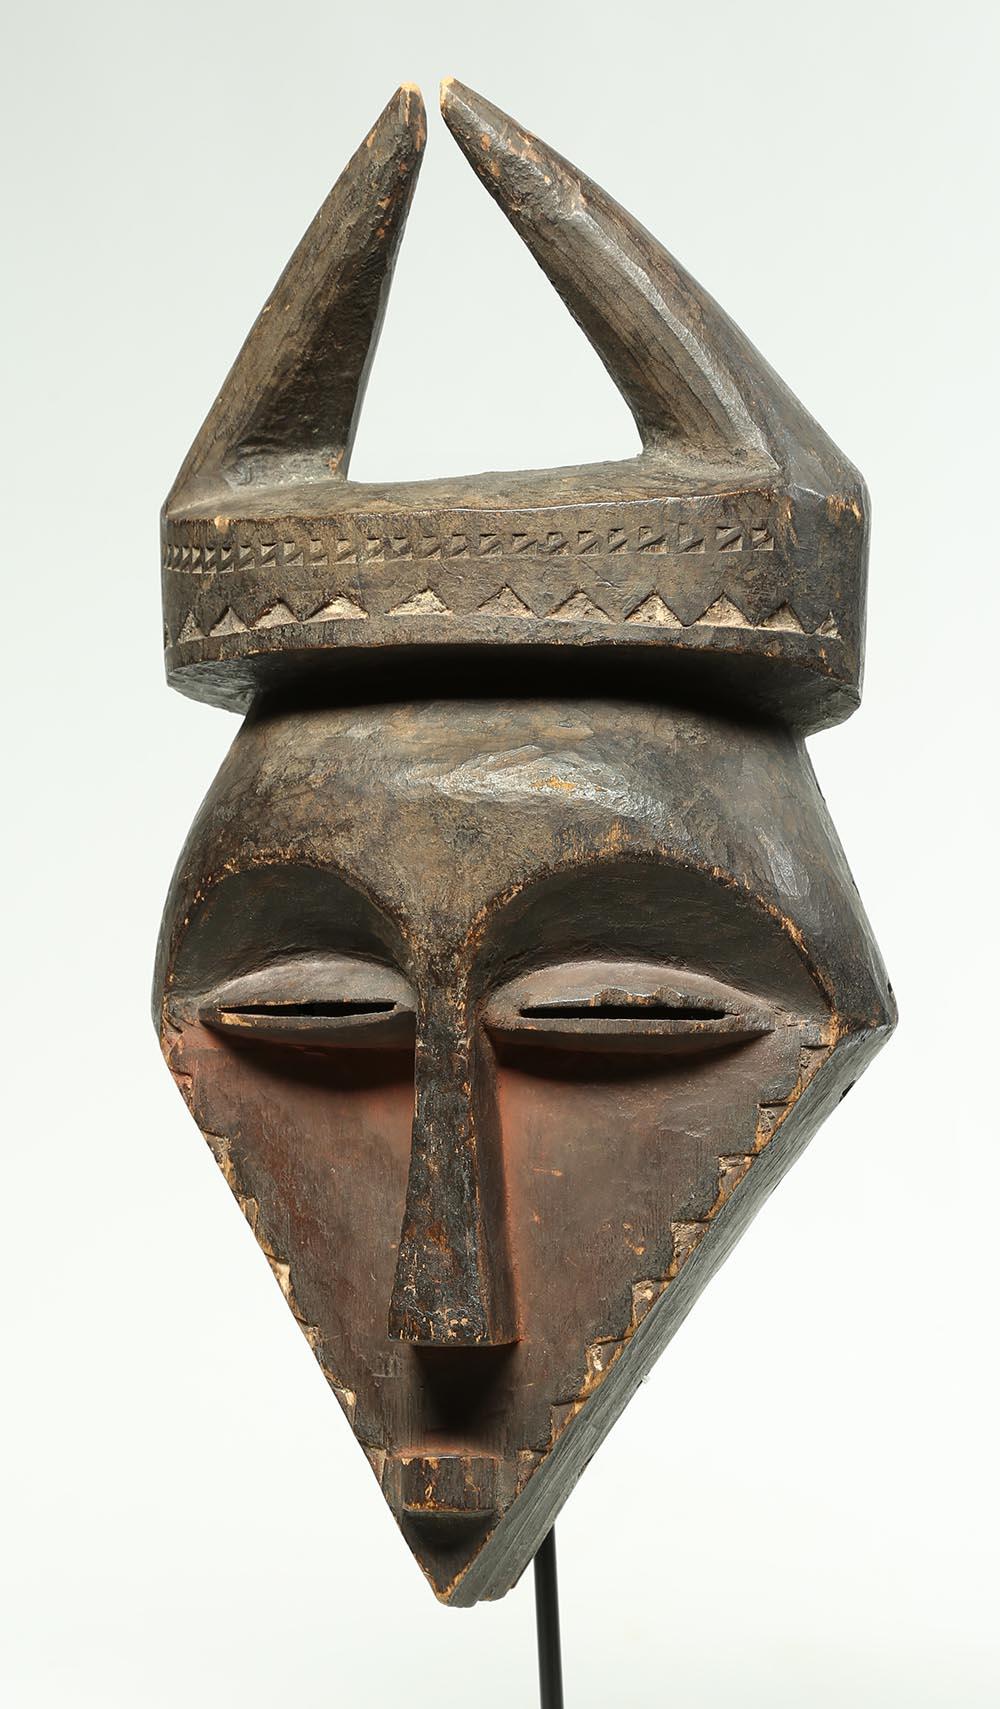 Large Eastern Pende mask with horns, Democratic Republic of Congo, Africa. Striking geometric, stylized face, two horns, traces of red pigments. On custom metal base, mask: 15 1/2 x 7 3/4 x 4 inches, total height with base 20 inches. De-accessioned